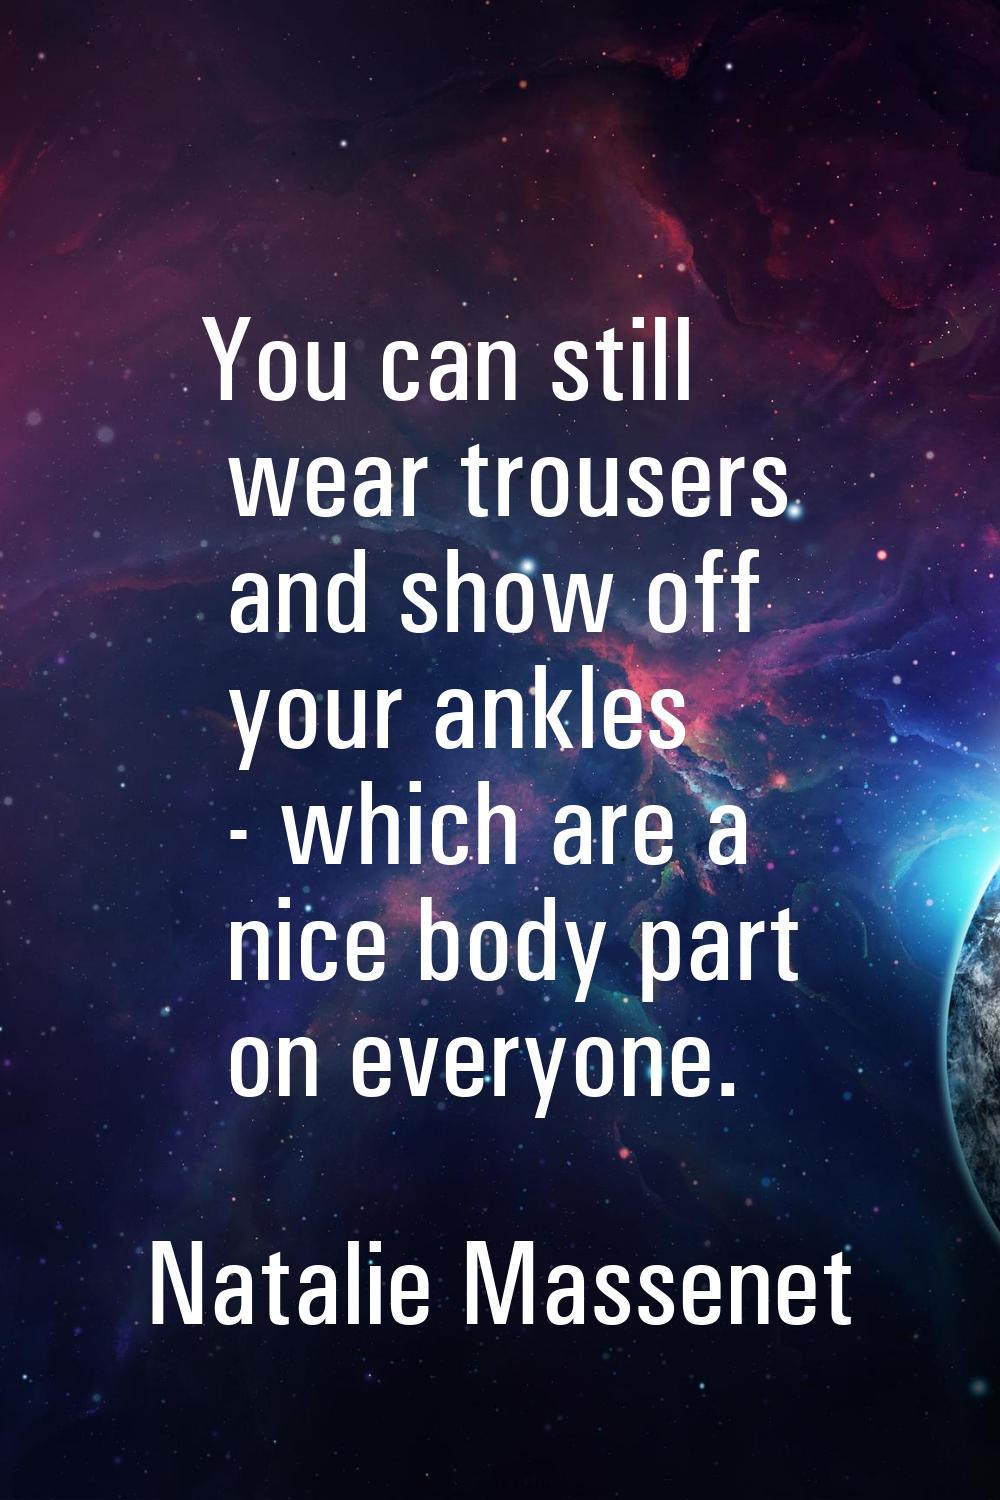 You can still wear trousers and show off your ankles - which are a nice body part on everyone.